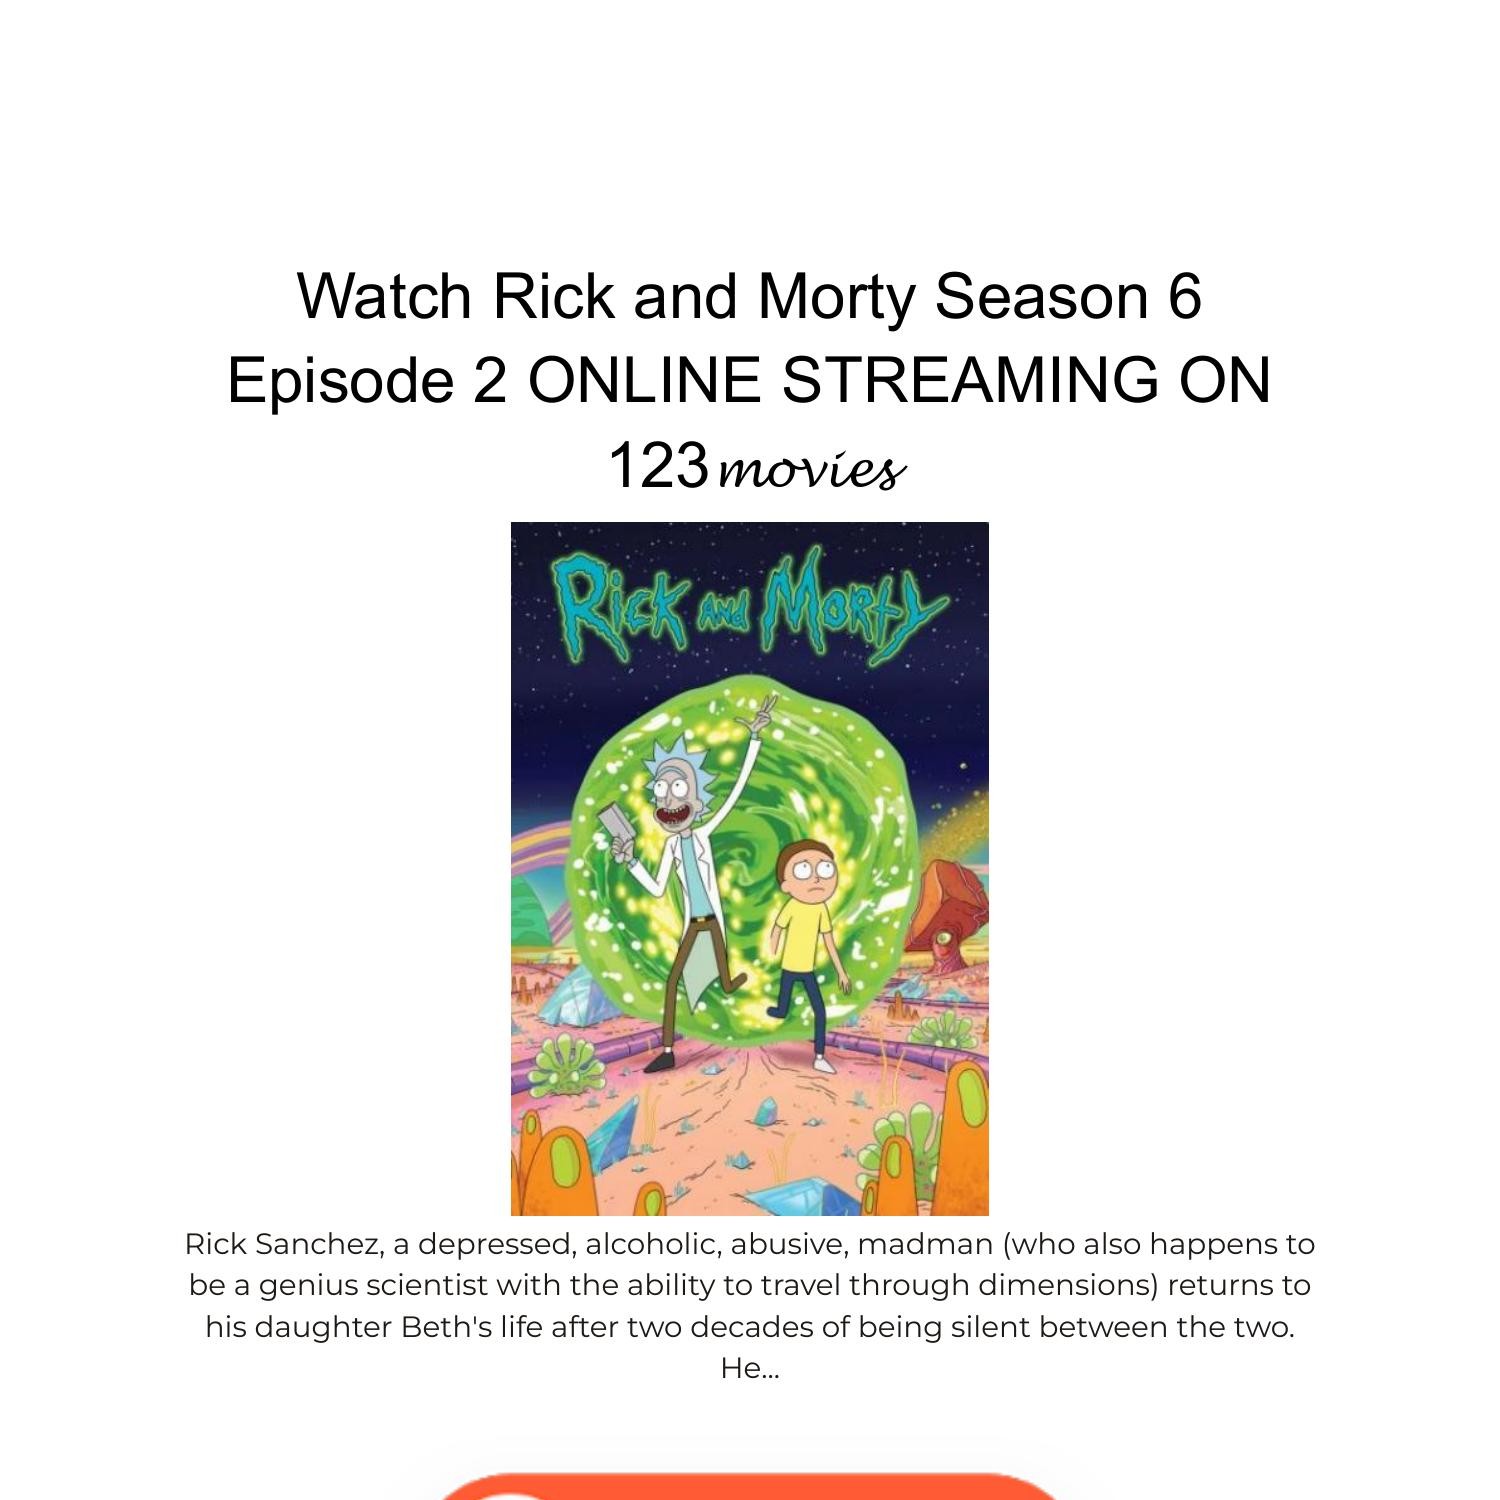 Watch Rick and Morty Online Streaming